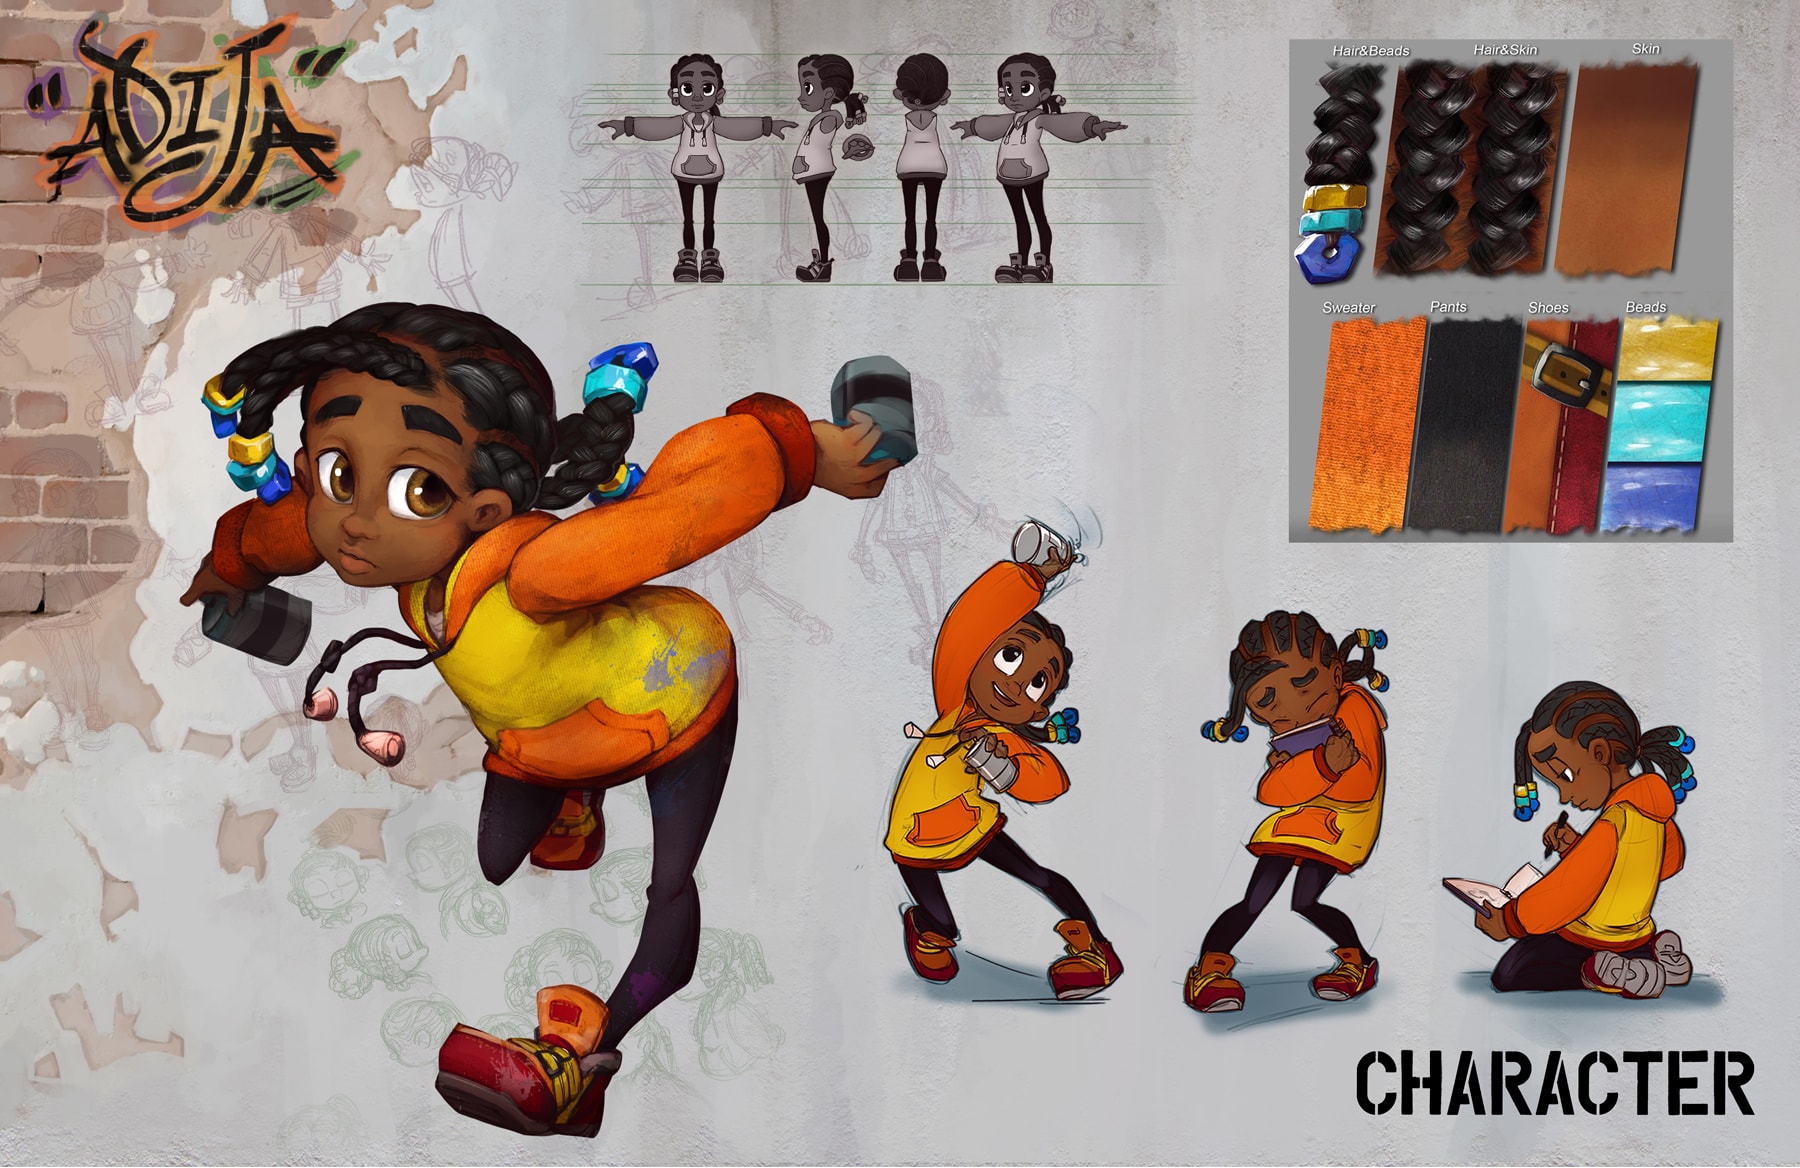 Sketches of the Adija character in various poses, and the details of her hair, skin and clothing